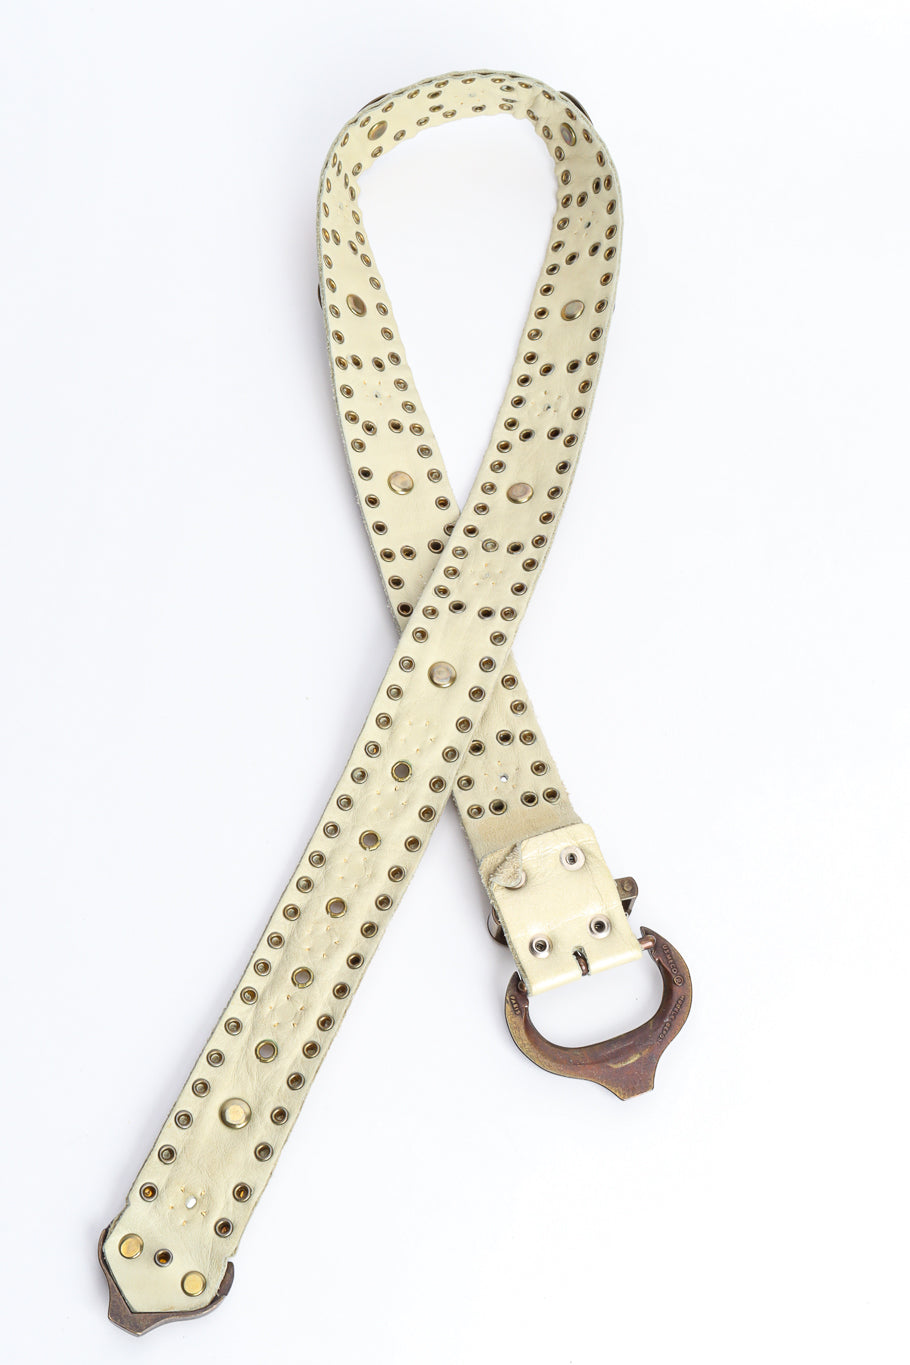 leather belt with multicolored gems by Usmeco inside loop @recessla